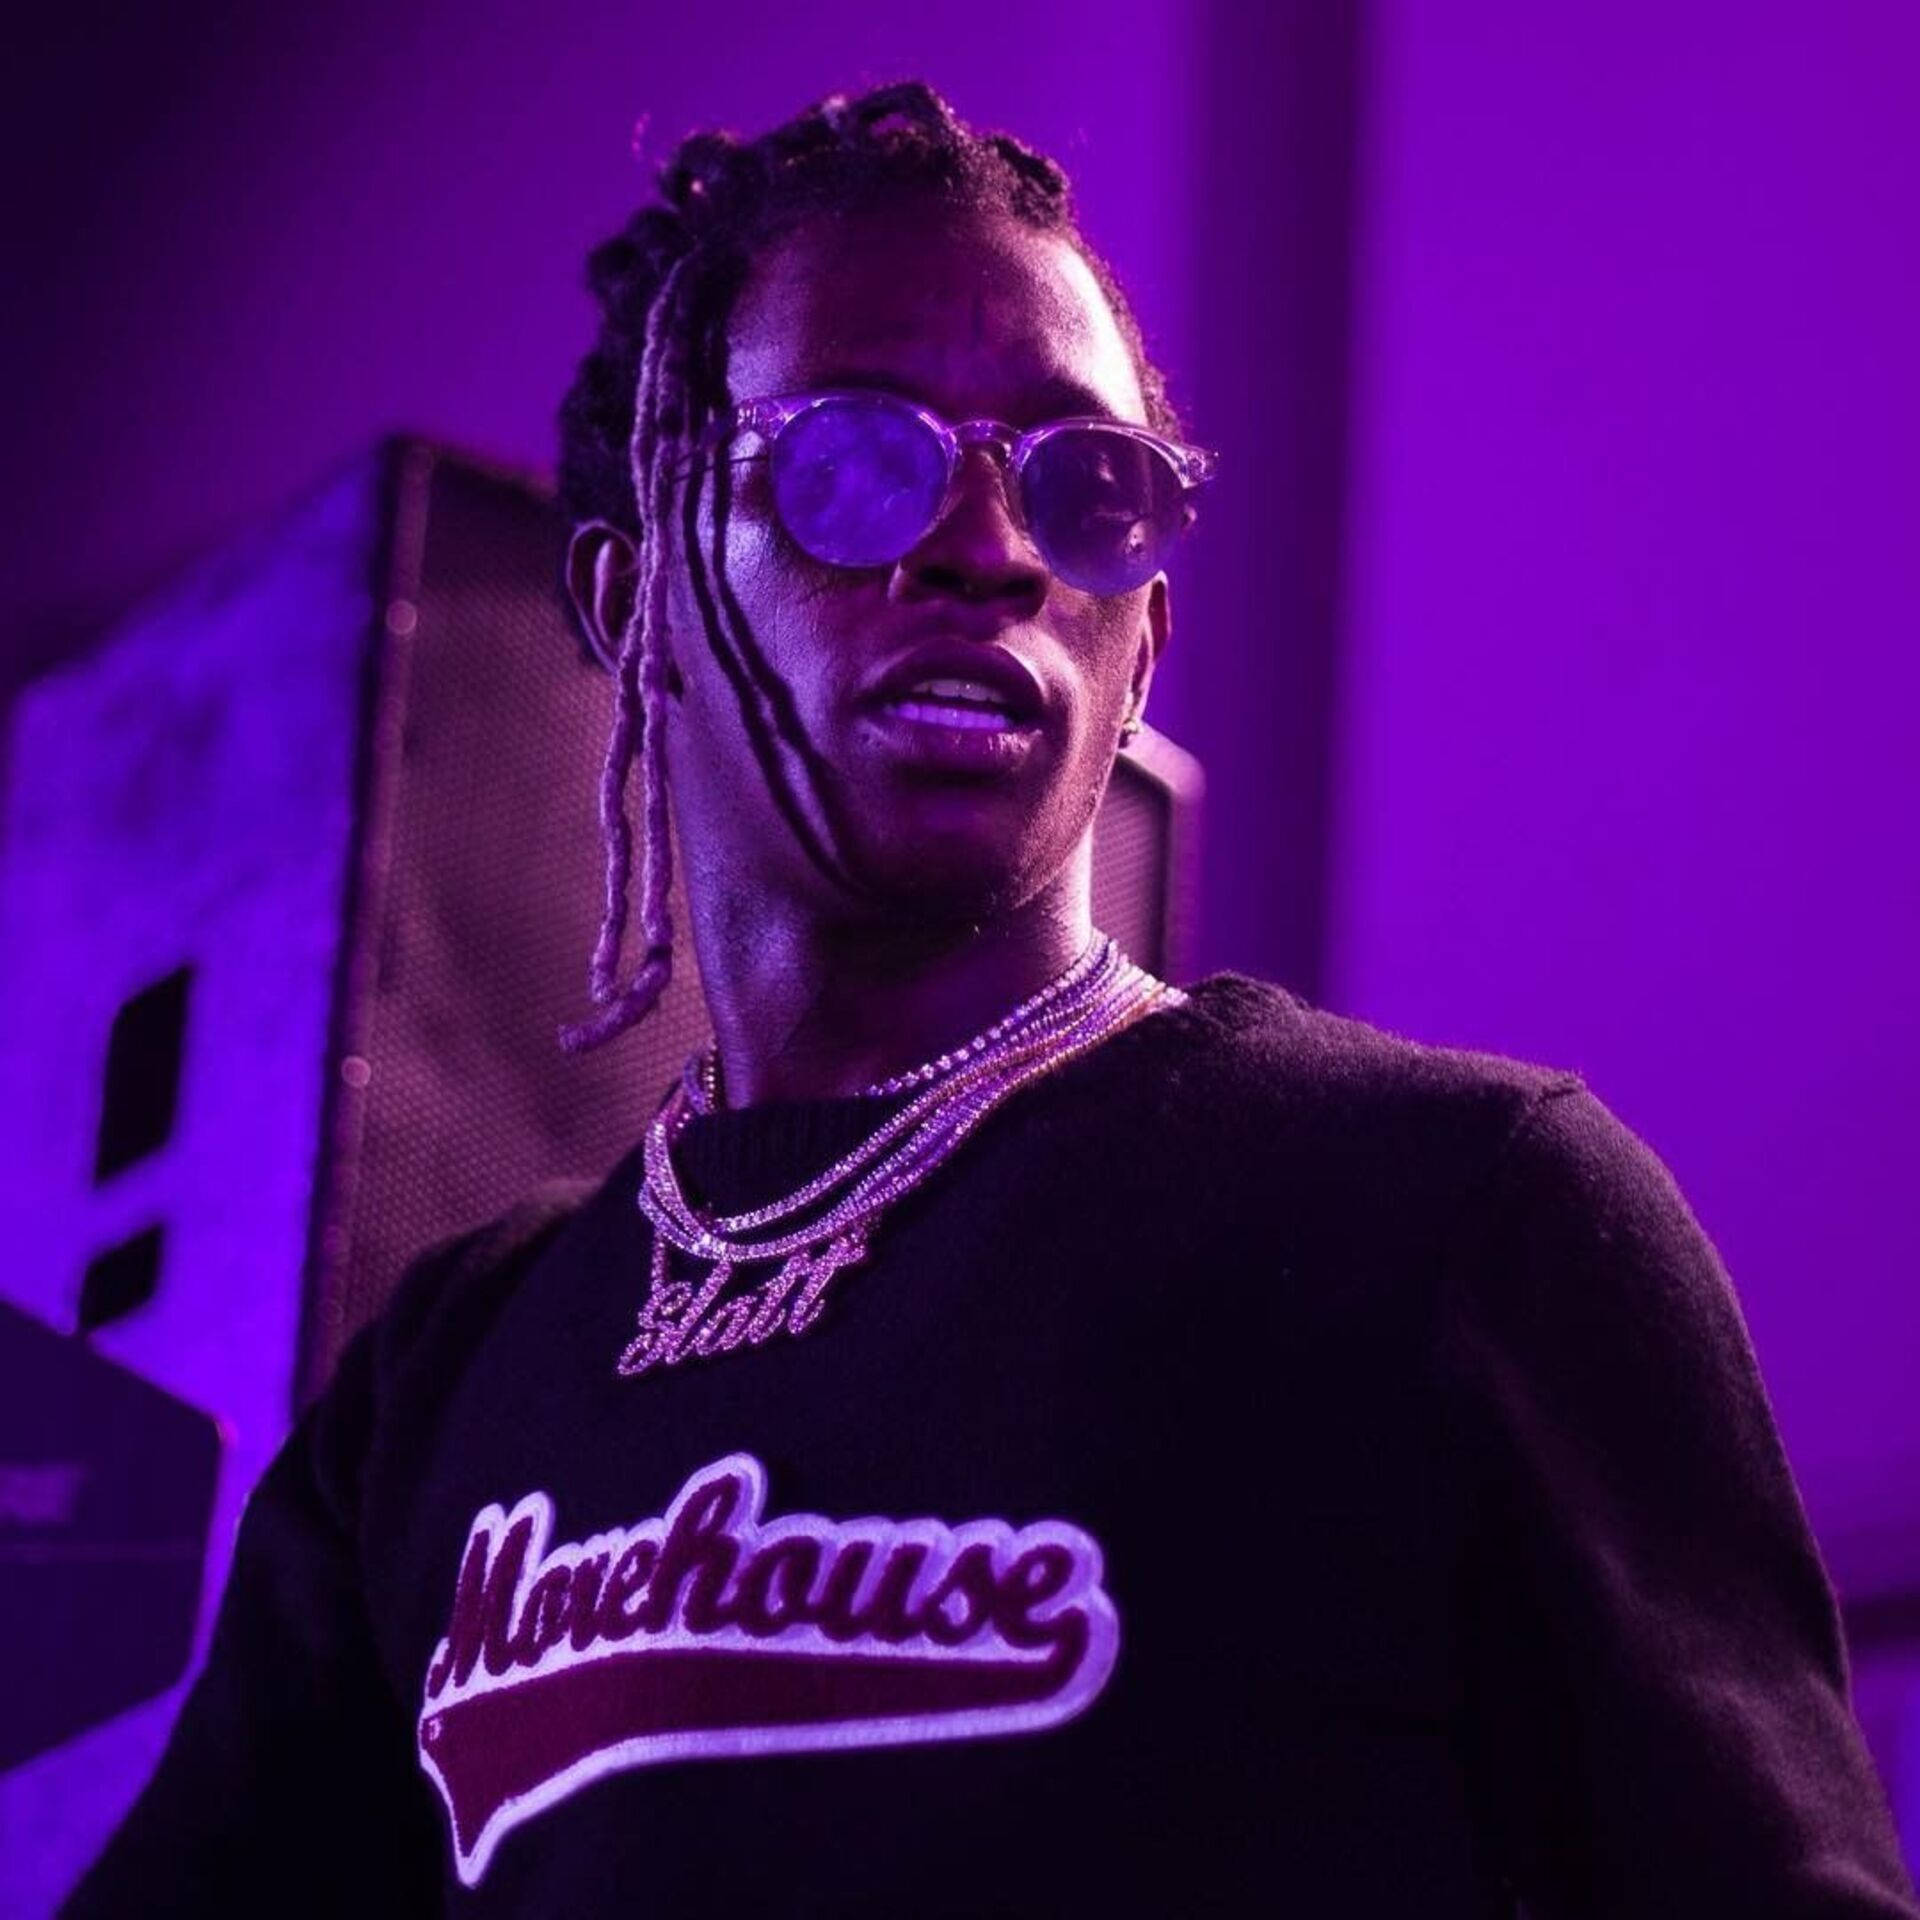 Young Thug With A Purple Lit Gun Background